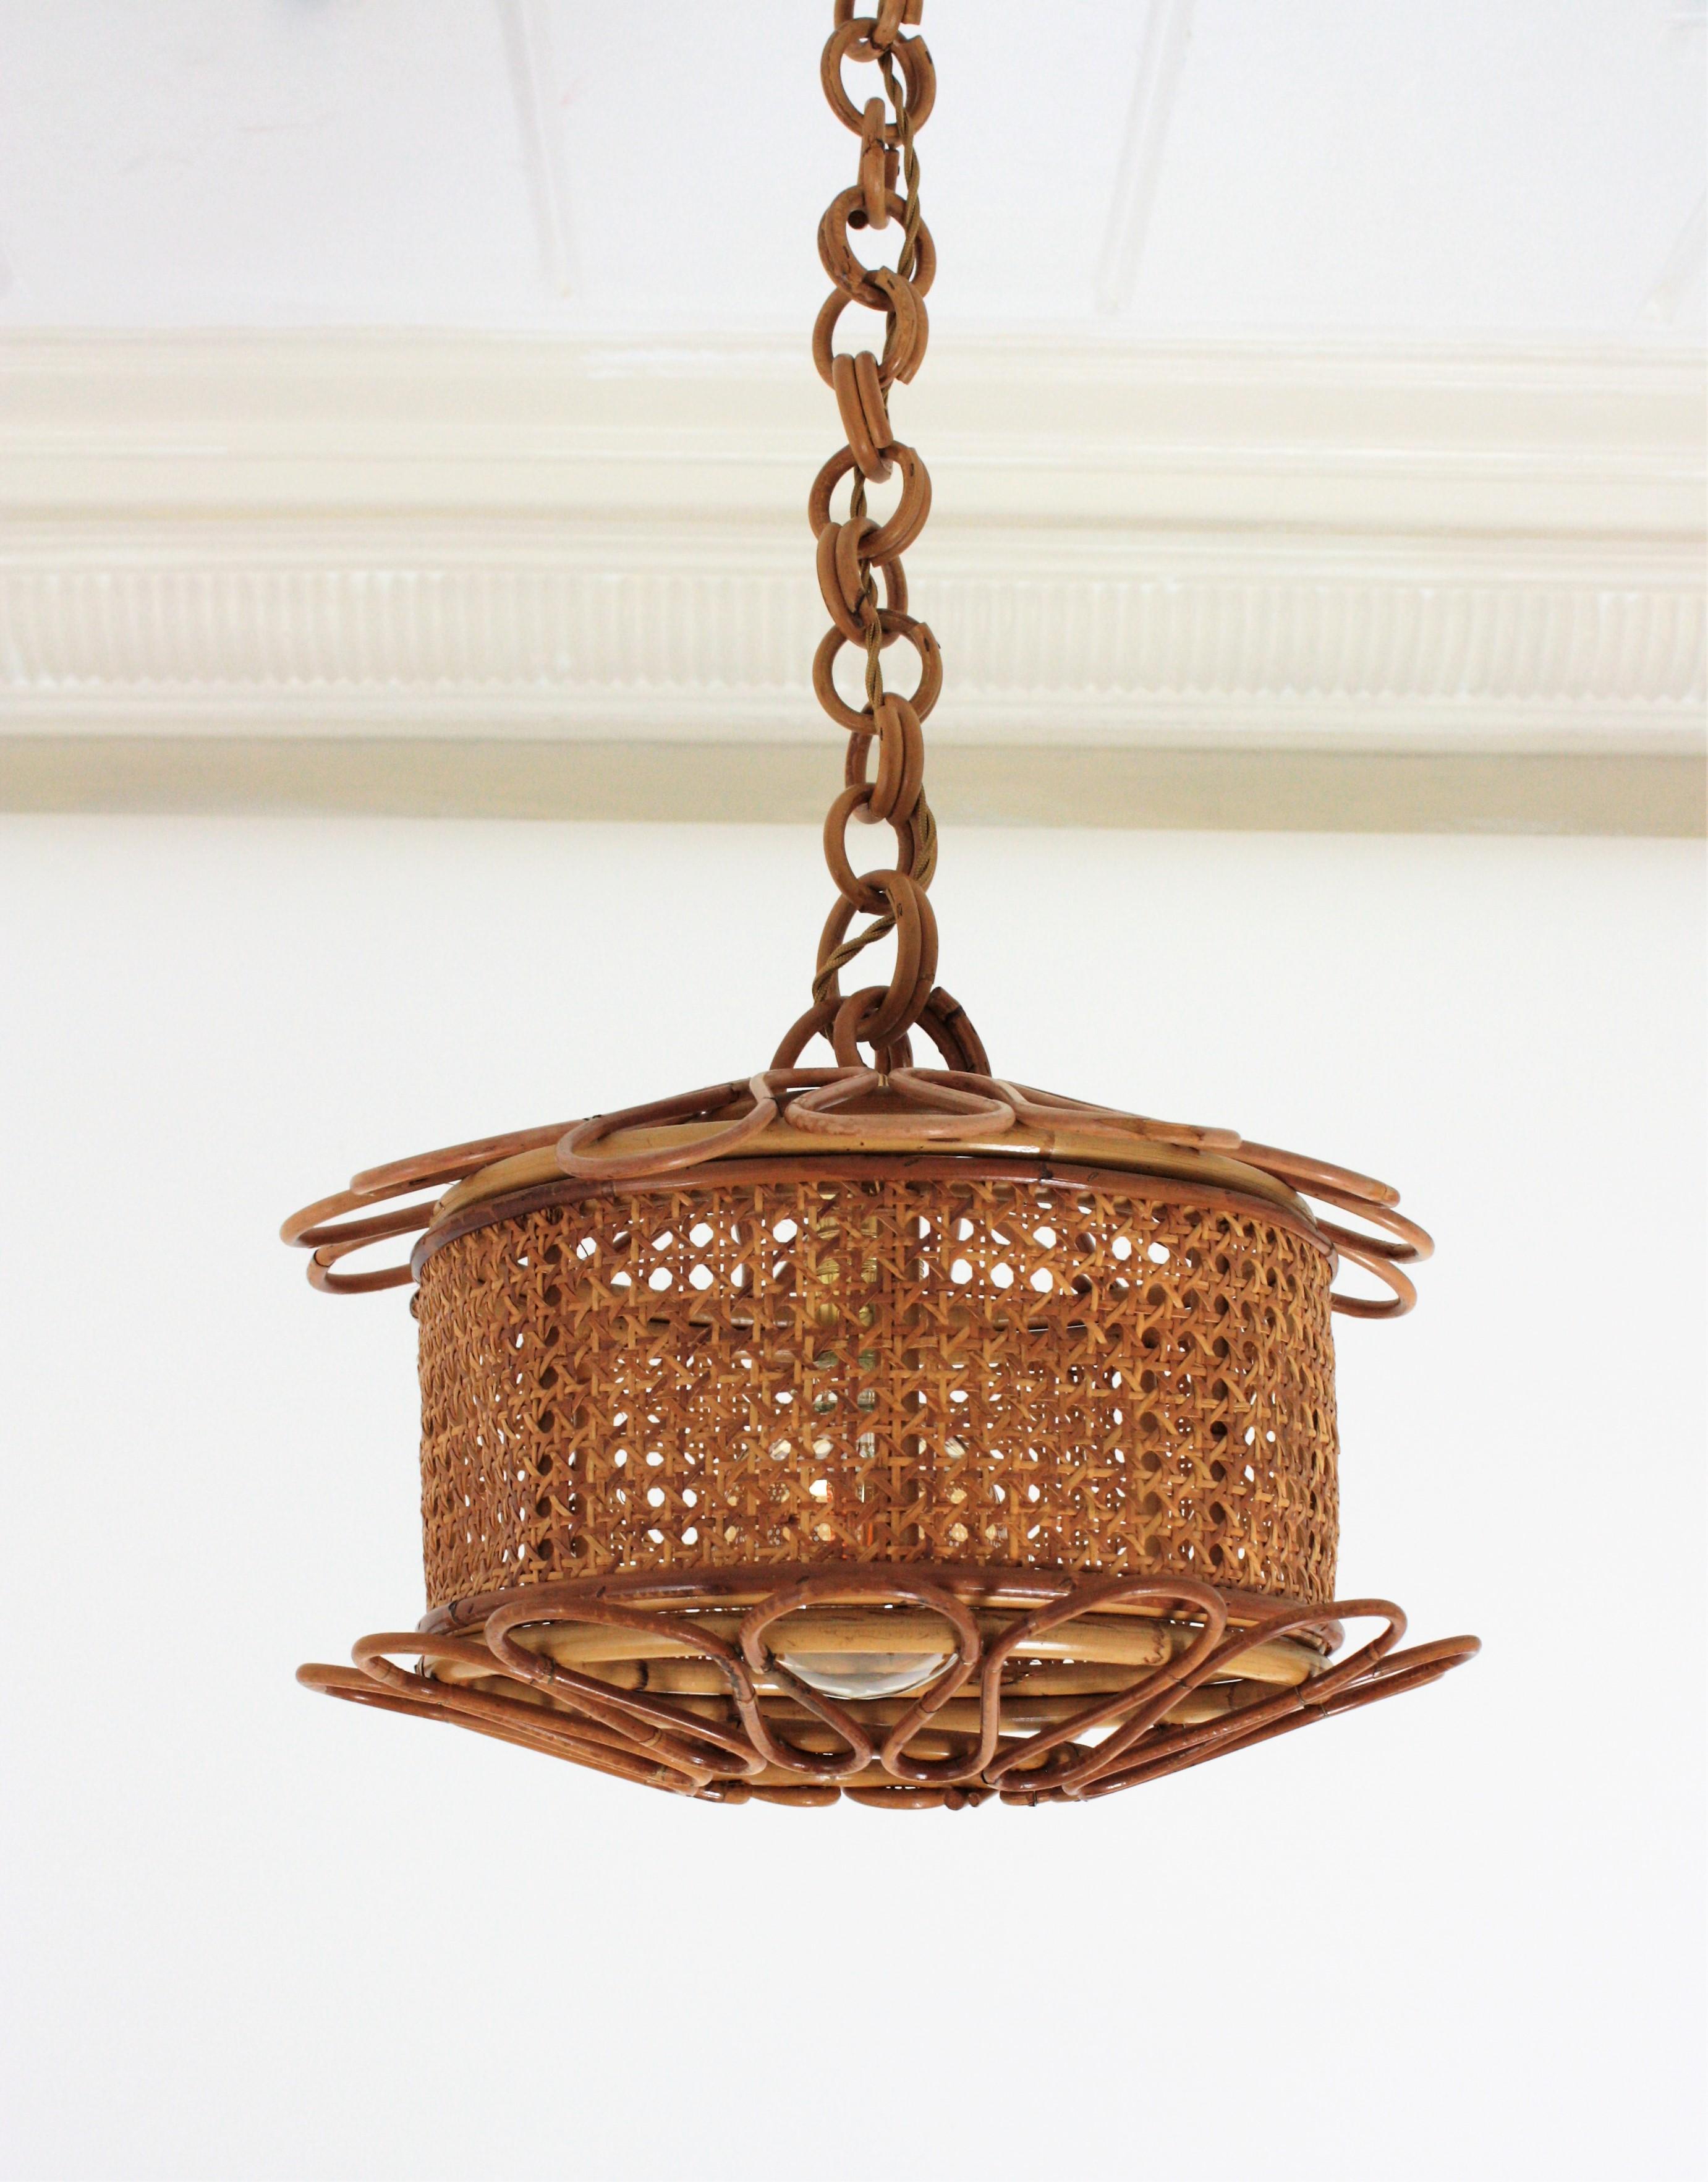 Beautiful Mid-Century Modern woven wicker wire and rattan pendant lamp / lantern, Italy, 1950s.
The woven wicker cylindrical shade of this lamp is accented by handcrafted rattan details as petals at the bottom and at the top. It hangs from a chain